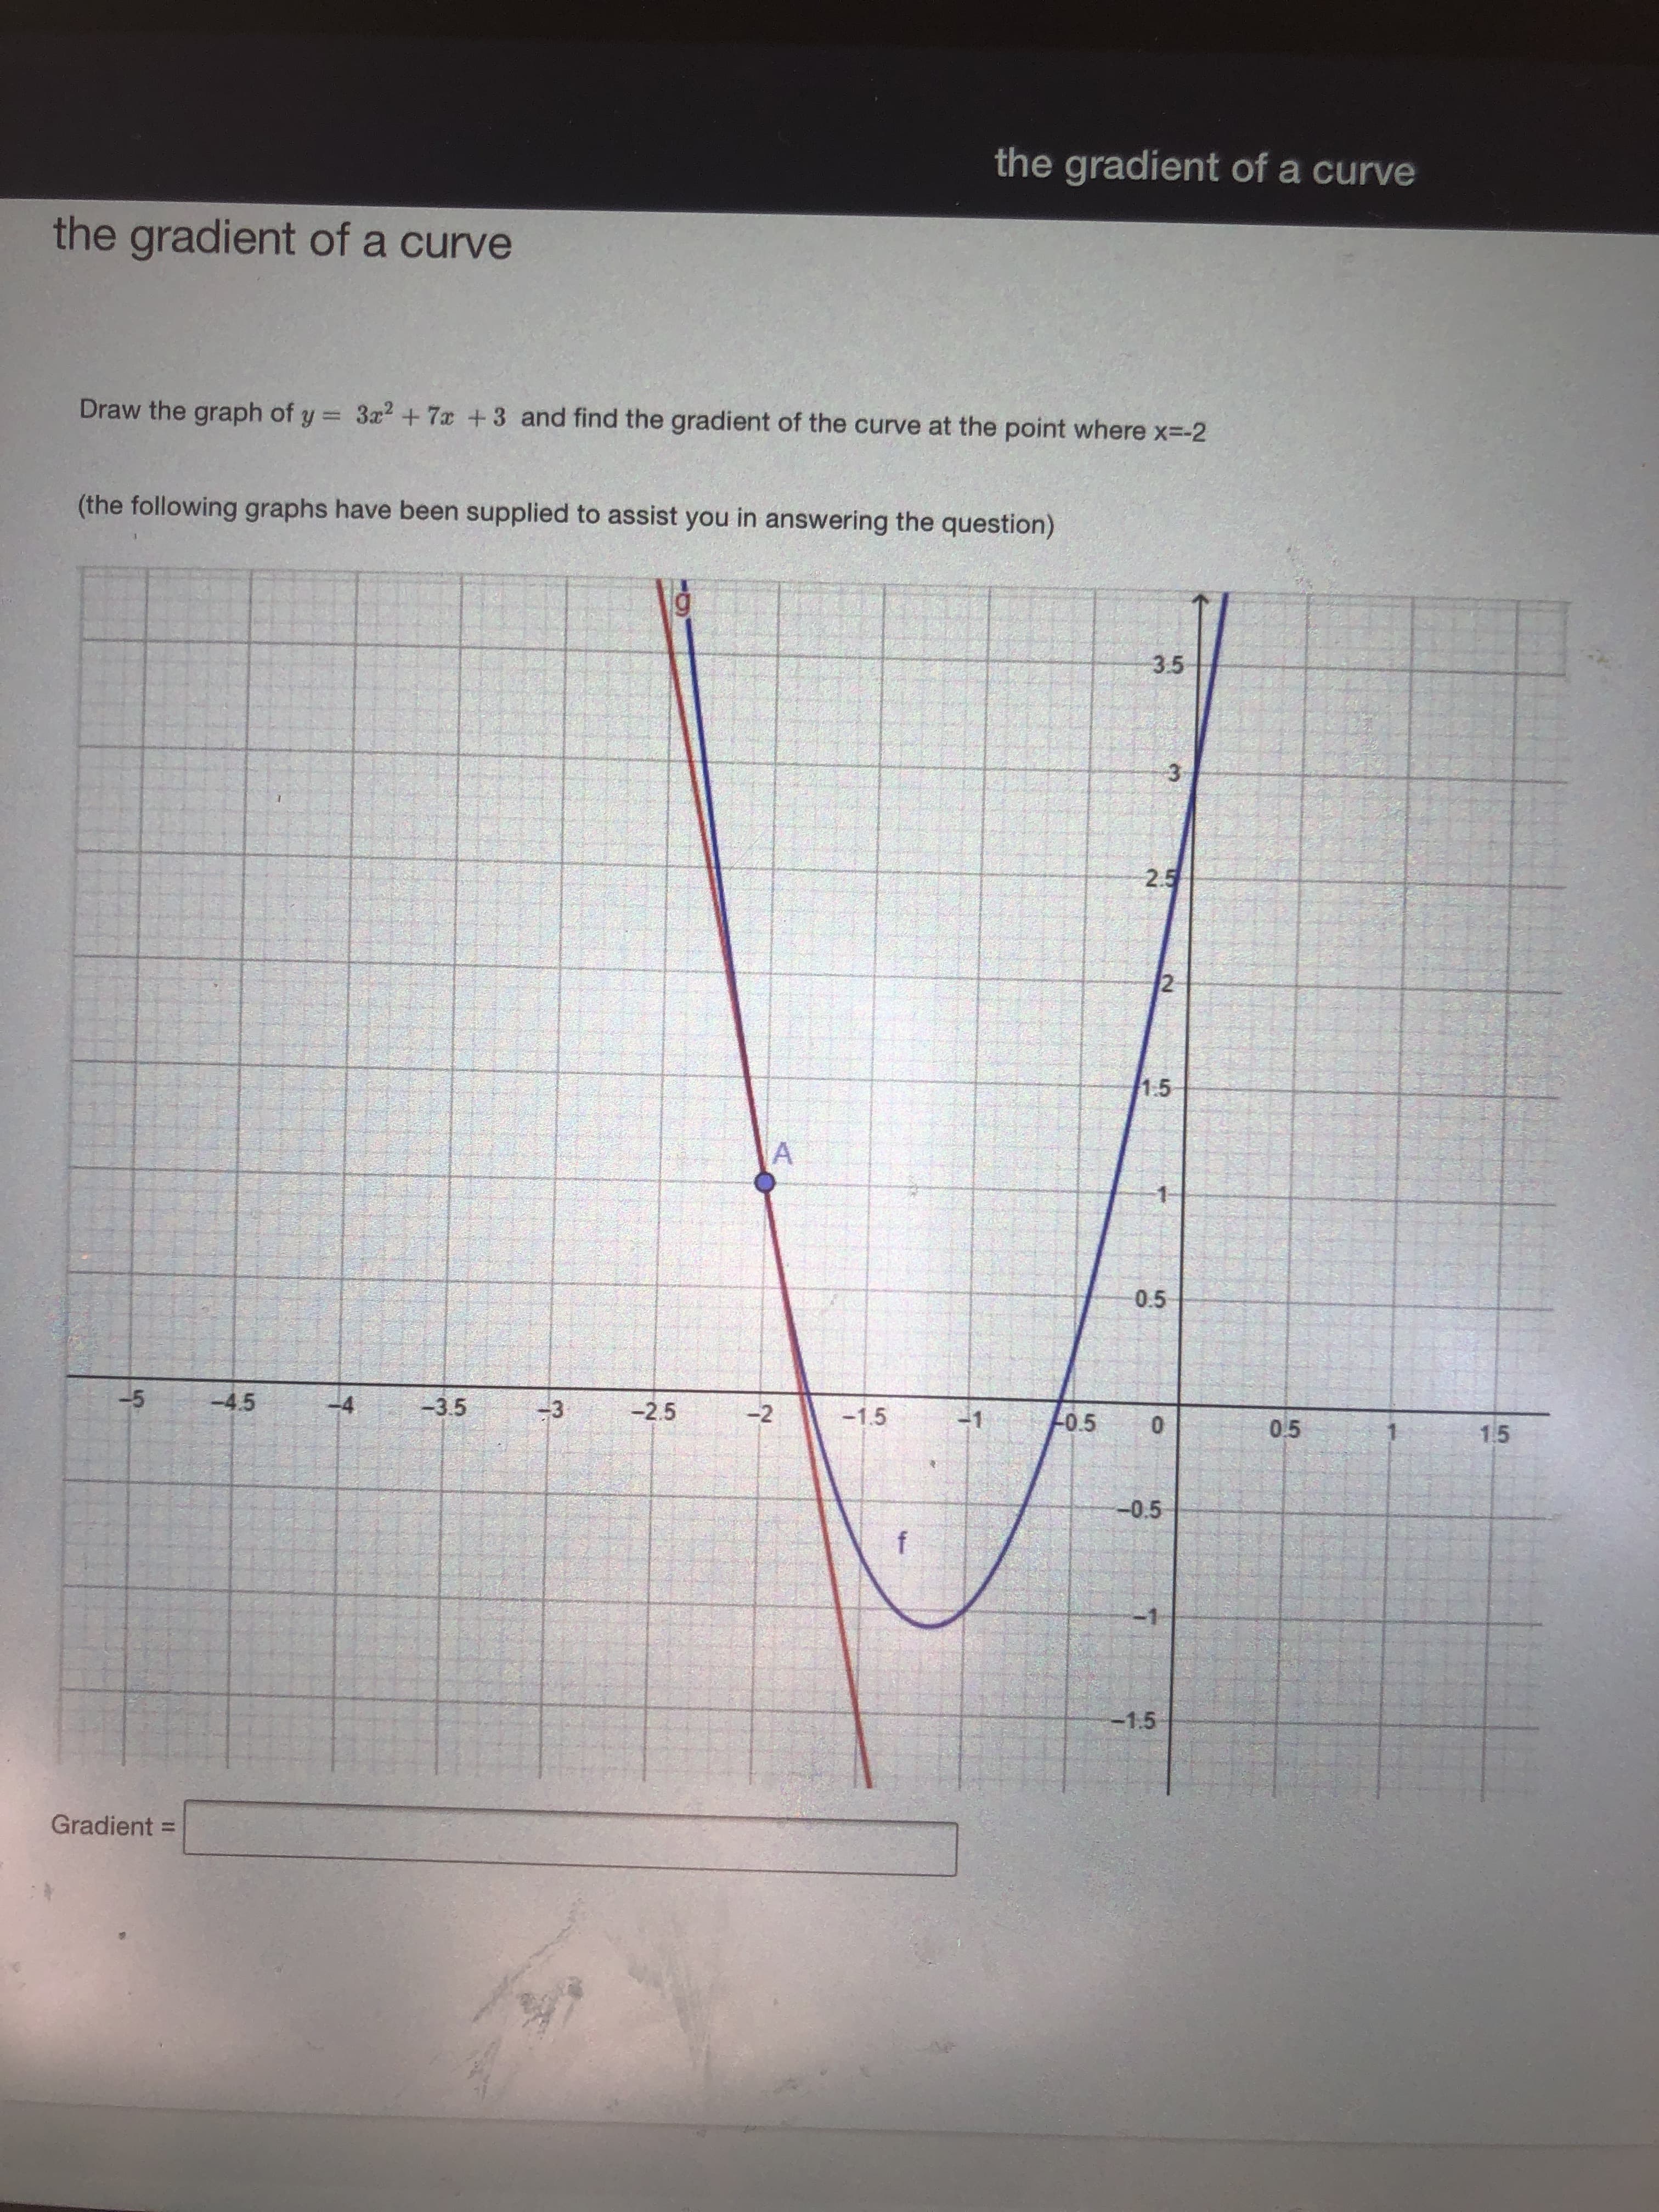 Draw the graph of y = 3x2+7x +3 and find the gradient of the curve at the point where x=-2
(the following graphs have been supplied to assist you in answering the question)
